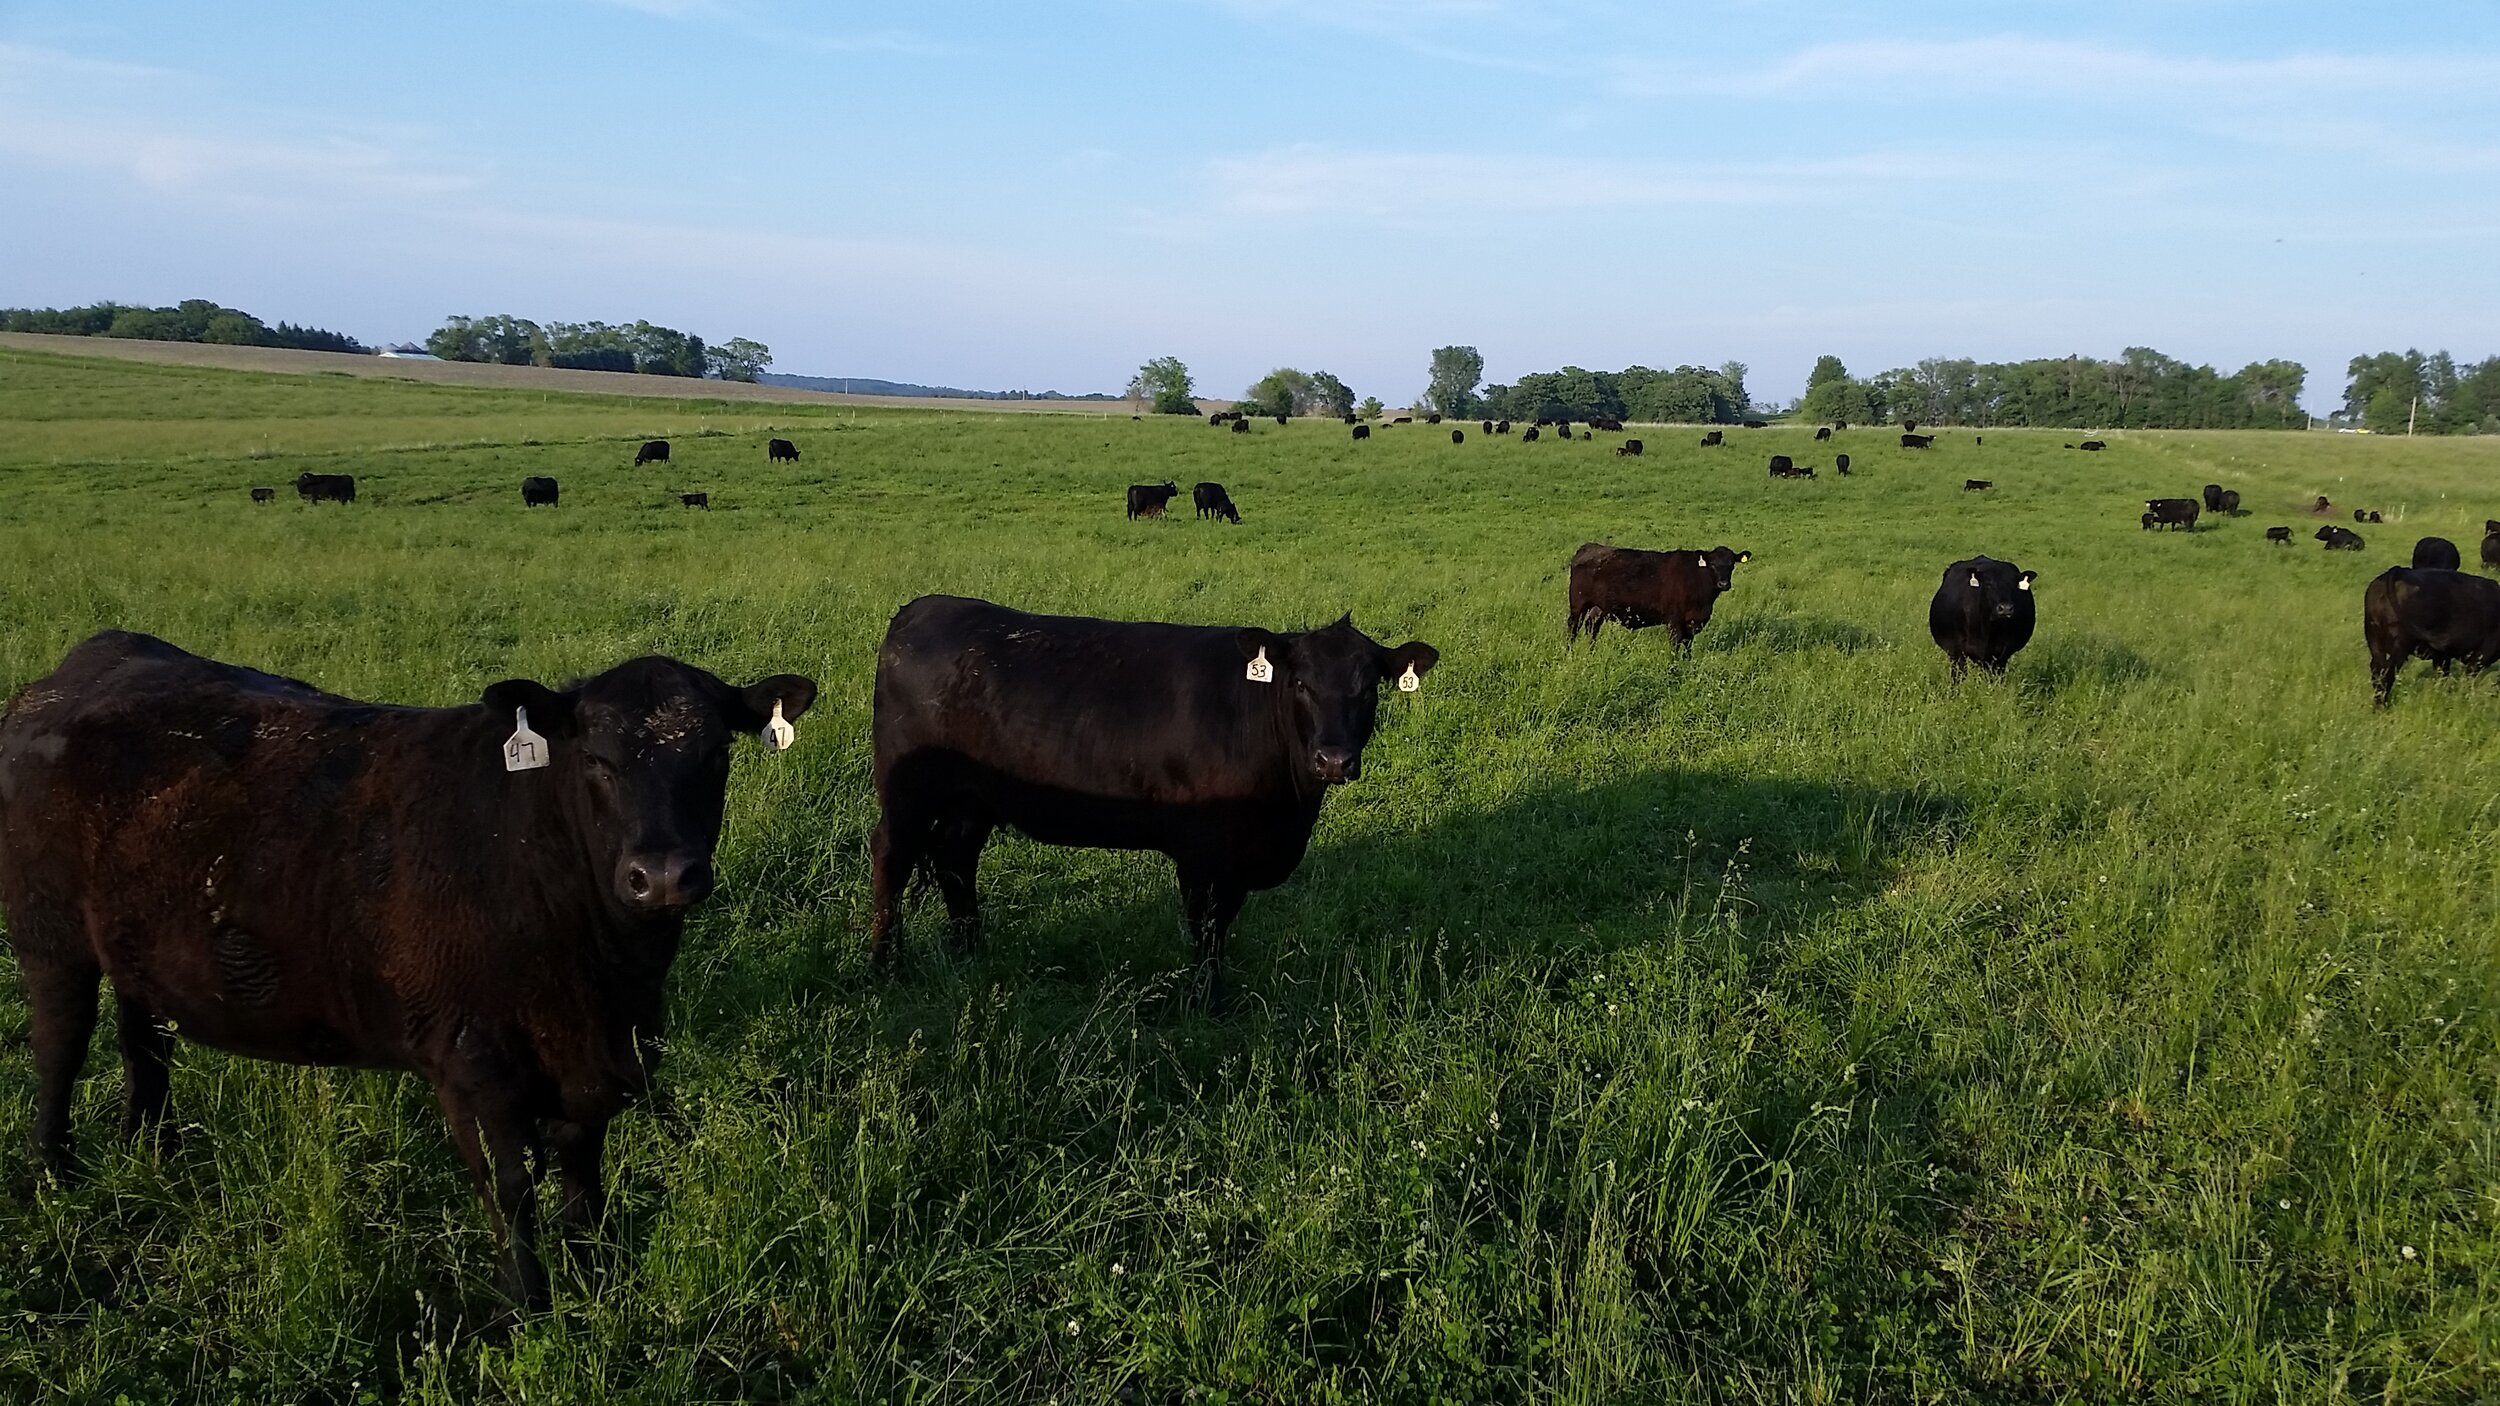 Black angus cattle in a lush green pasture